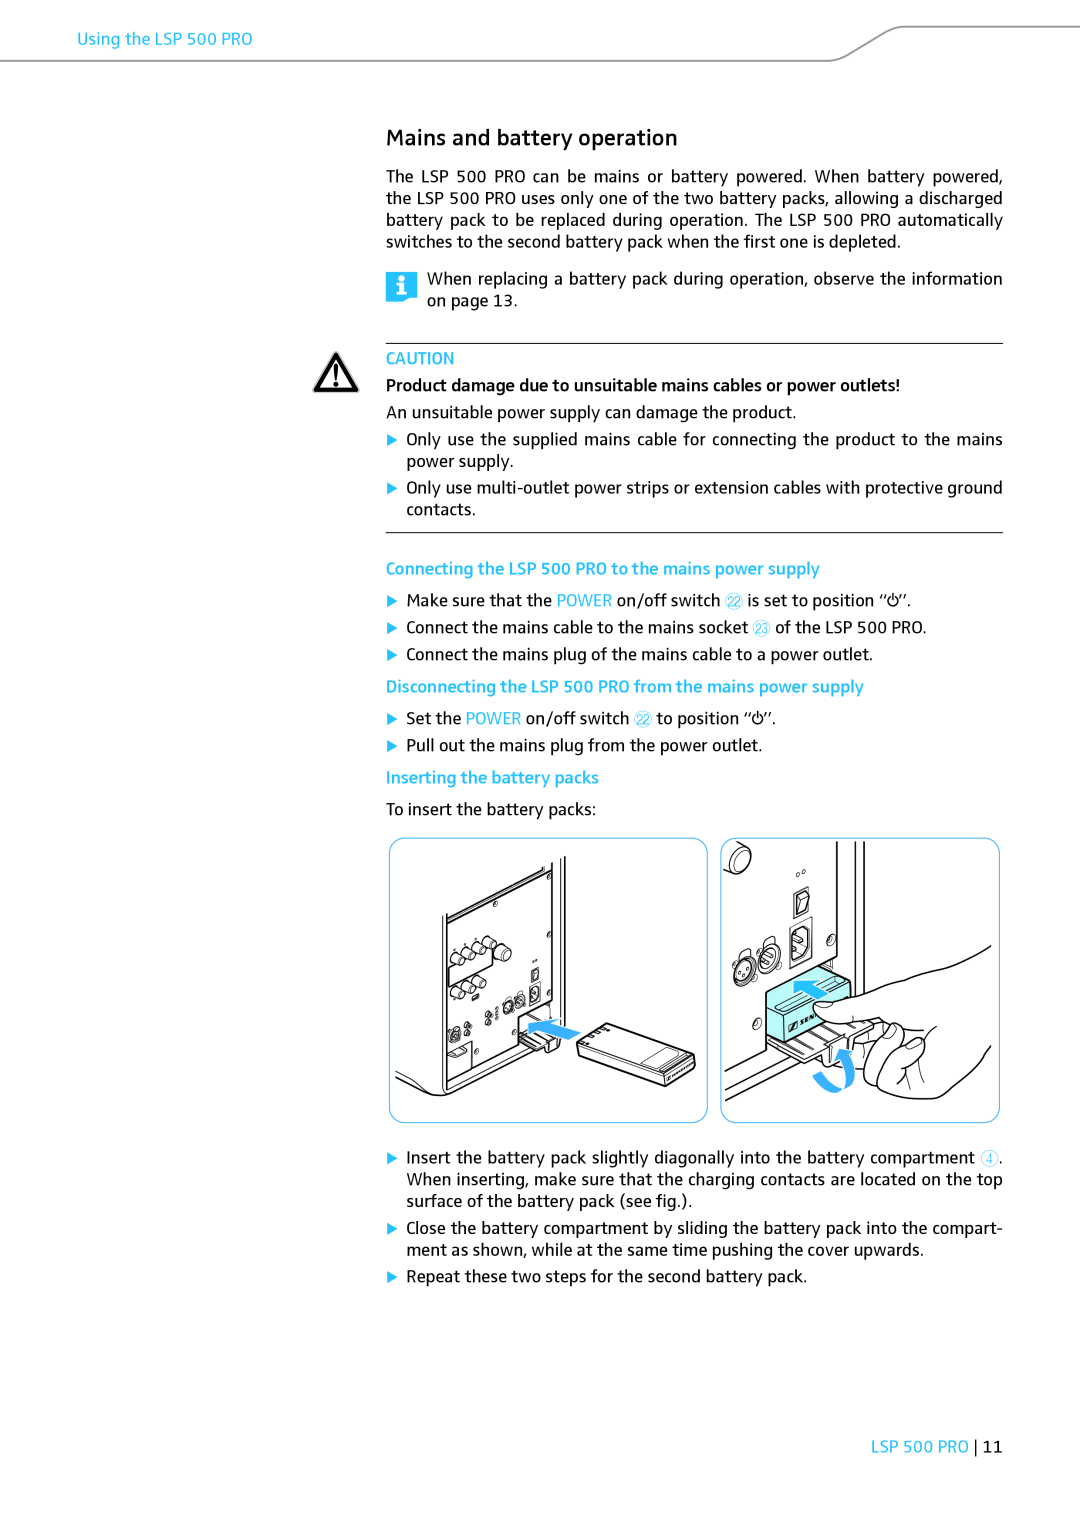 Sennheiser instruction manual Mains and battery operation, Inserting the battery packs, Using the LSP 500 PRO 